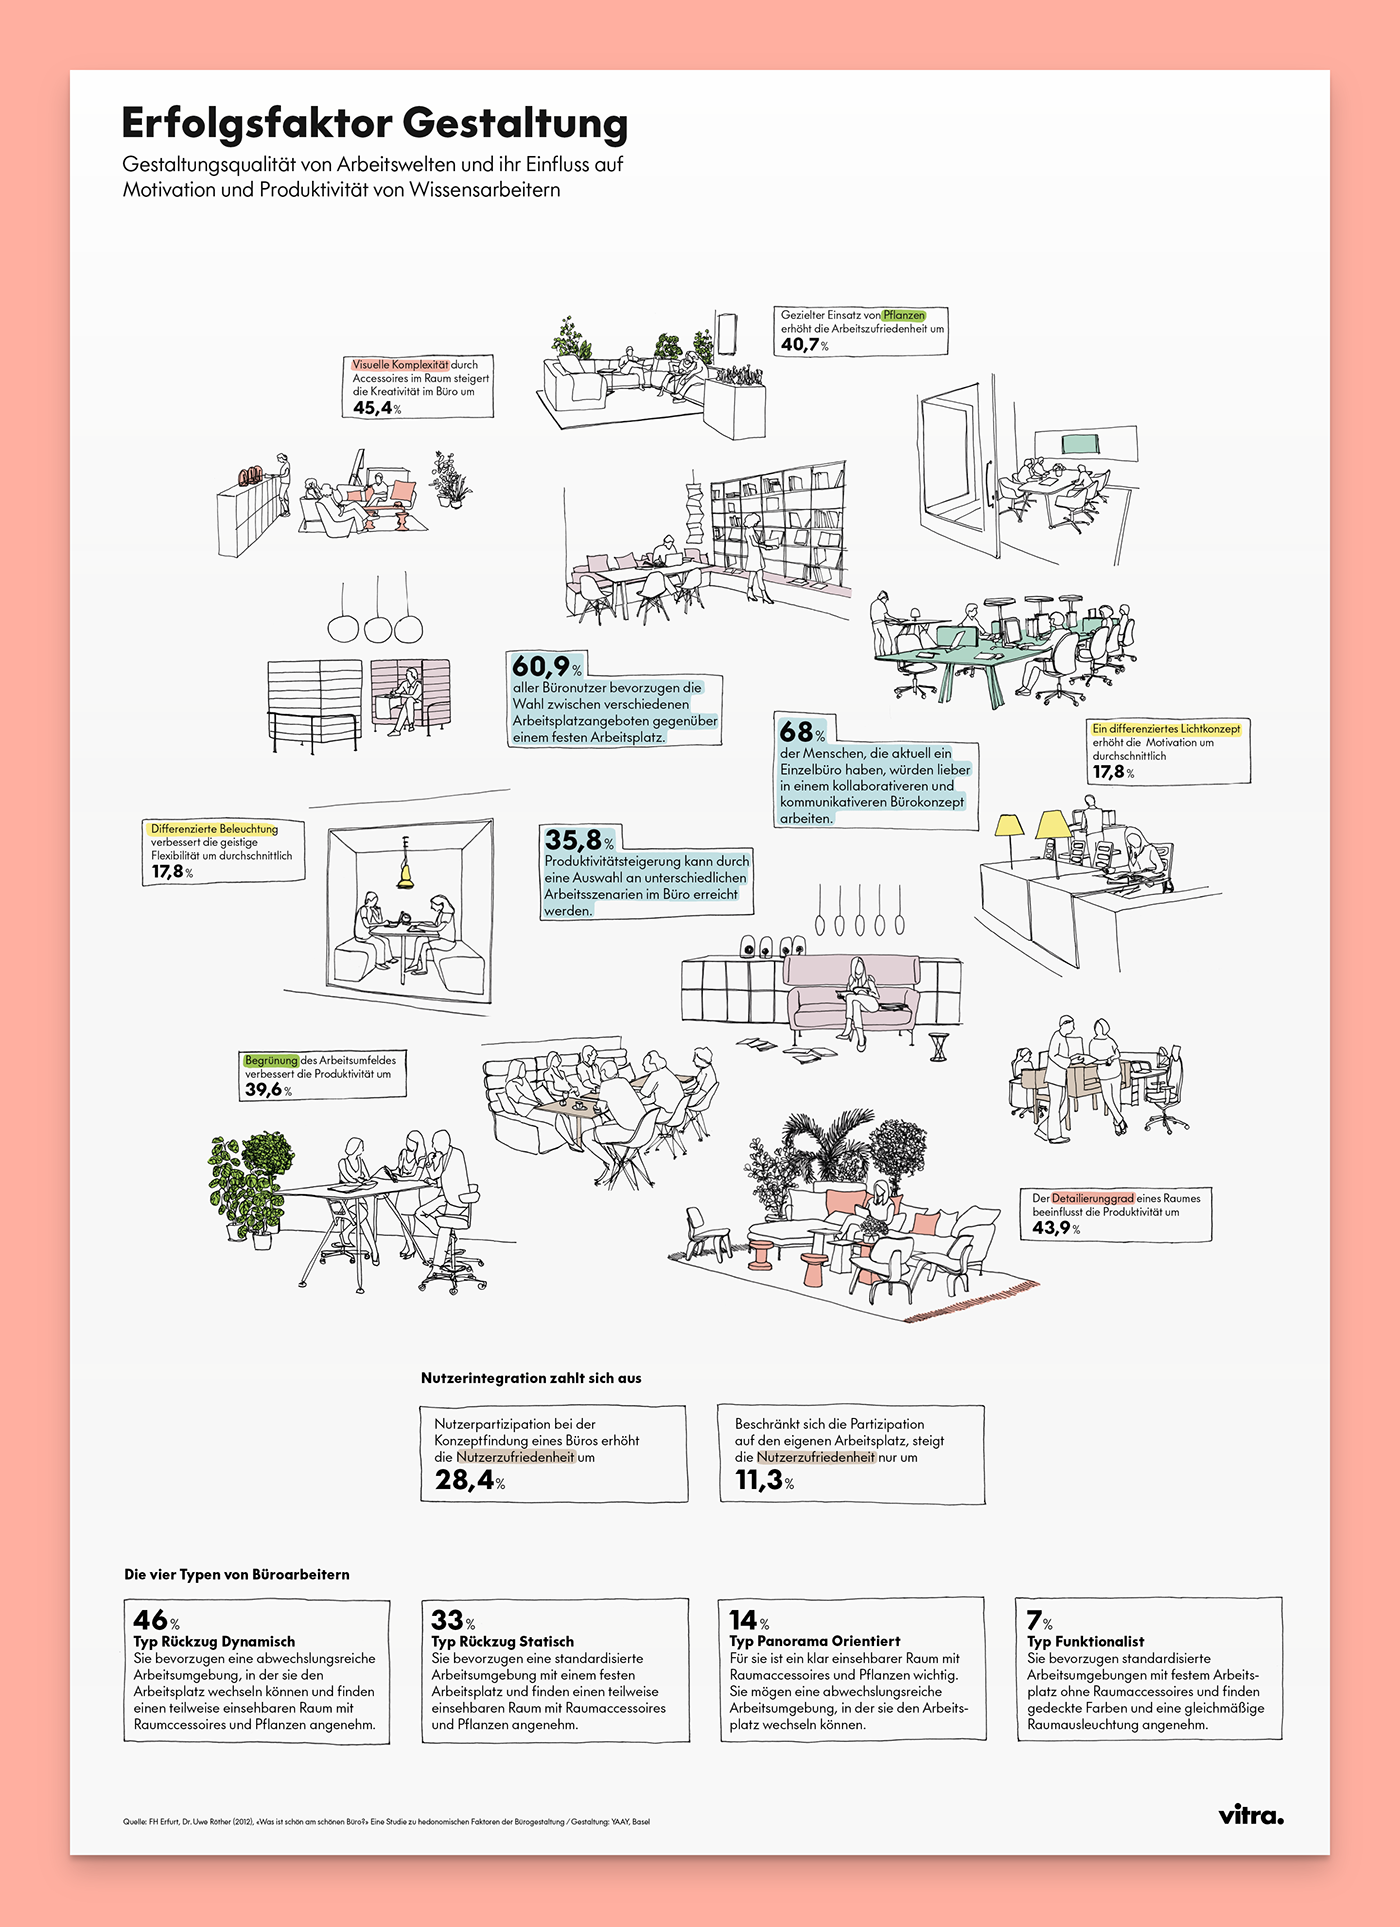 Basel furniture report study research design YAAY Info Graphics YAAY Reports Vitra data visualization big picture